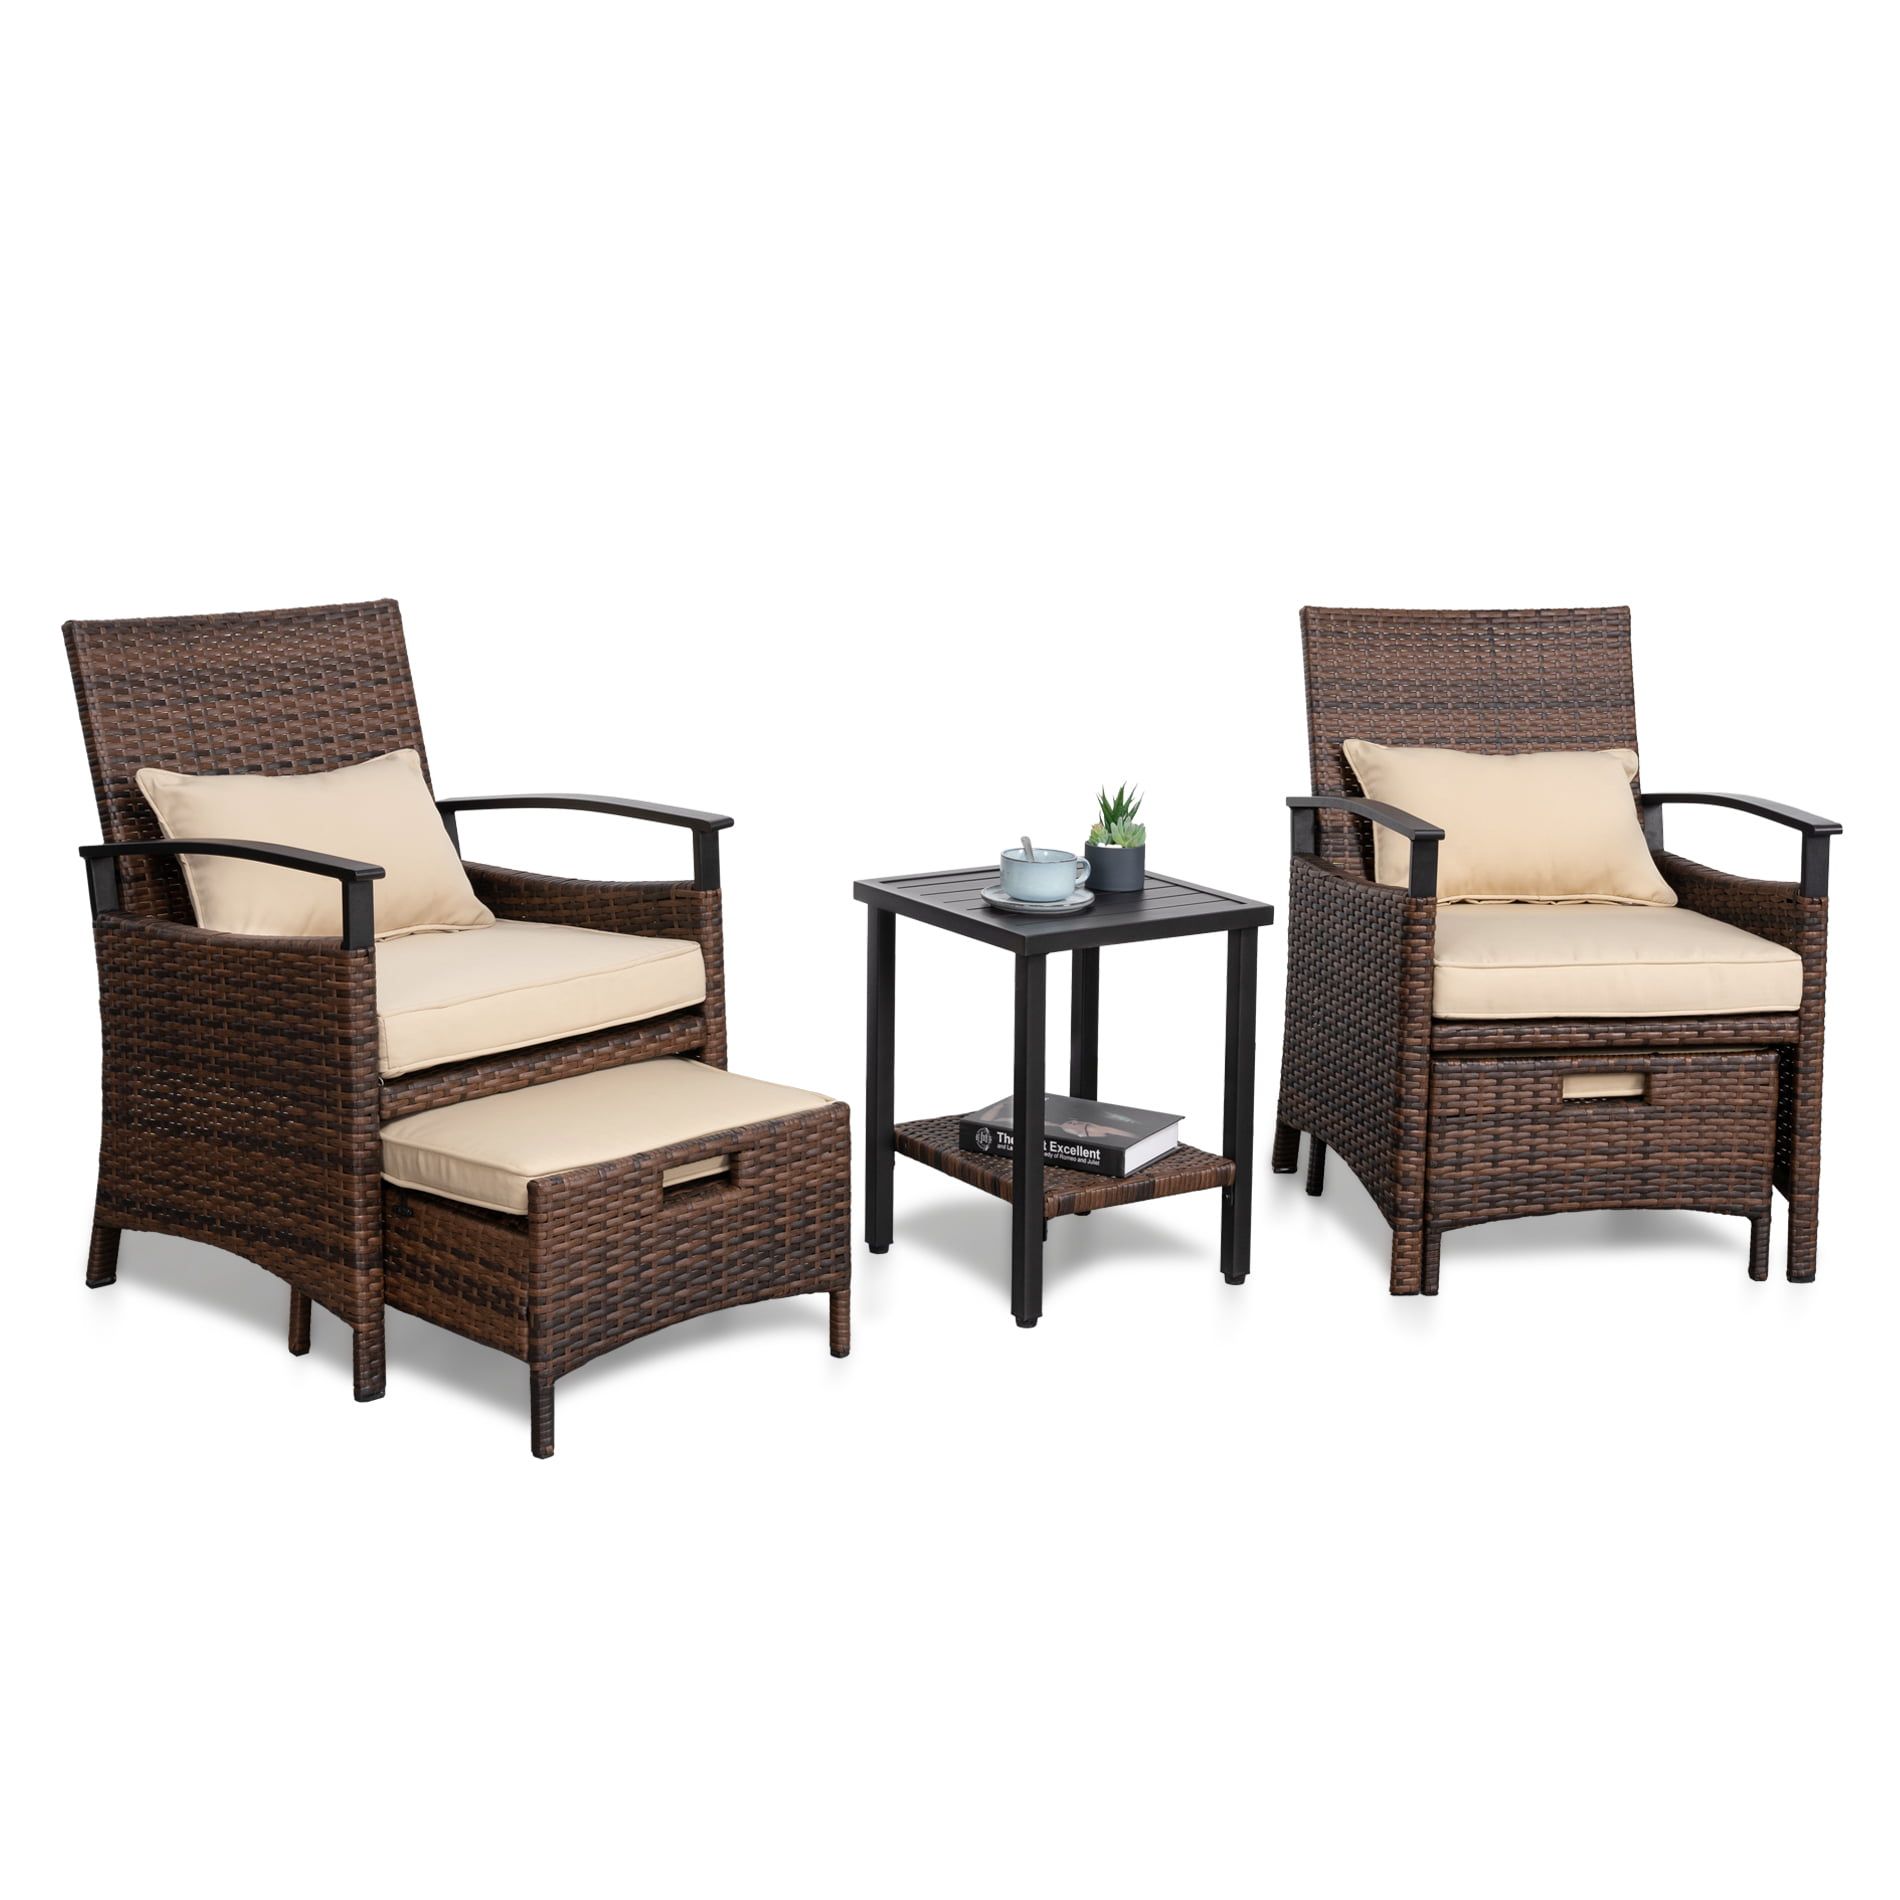 5 Piece Wicker Patio Furniture Set Outdoor Chairs And Ottomans – Walmart With Regard To Ottomans Patio Furniture Set (Photo 4 of 15)